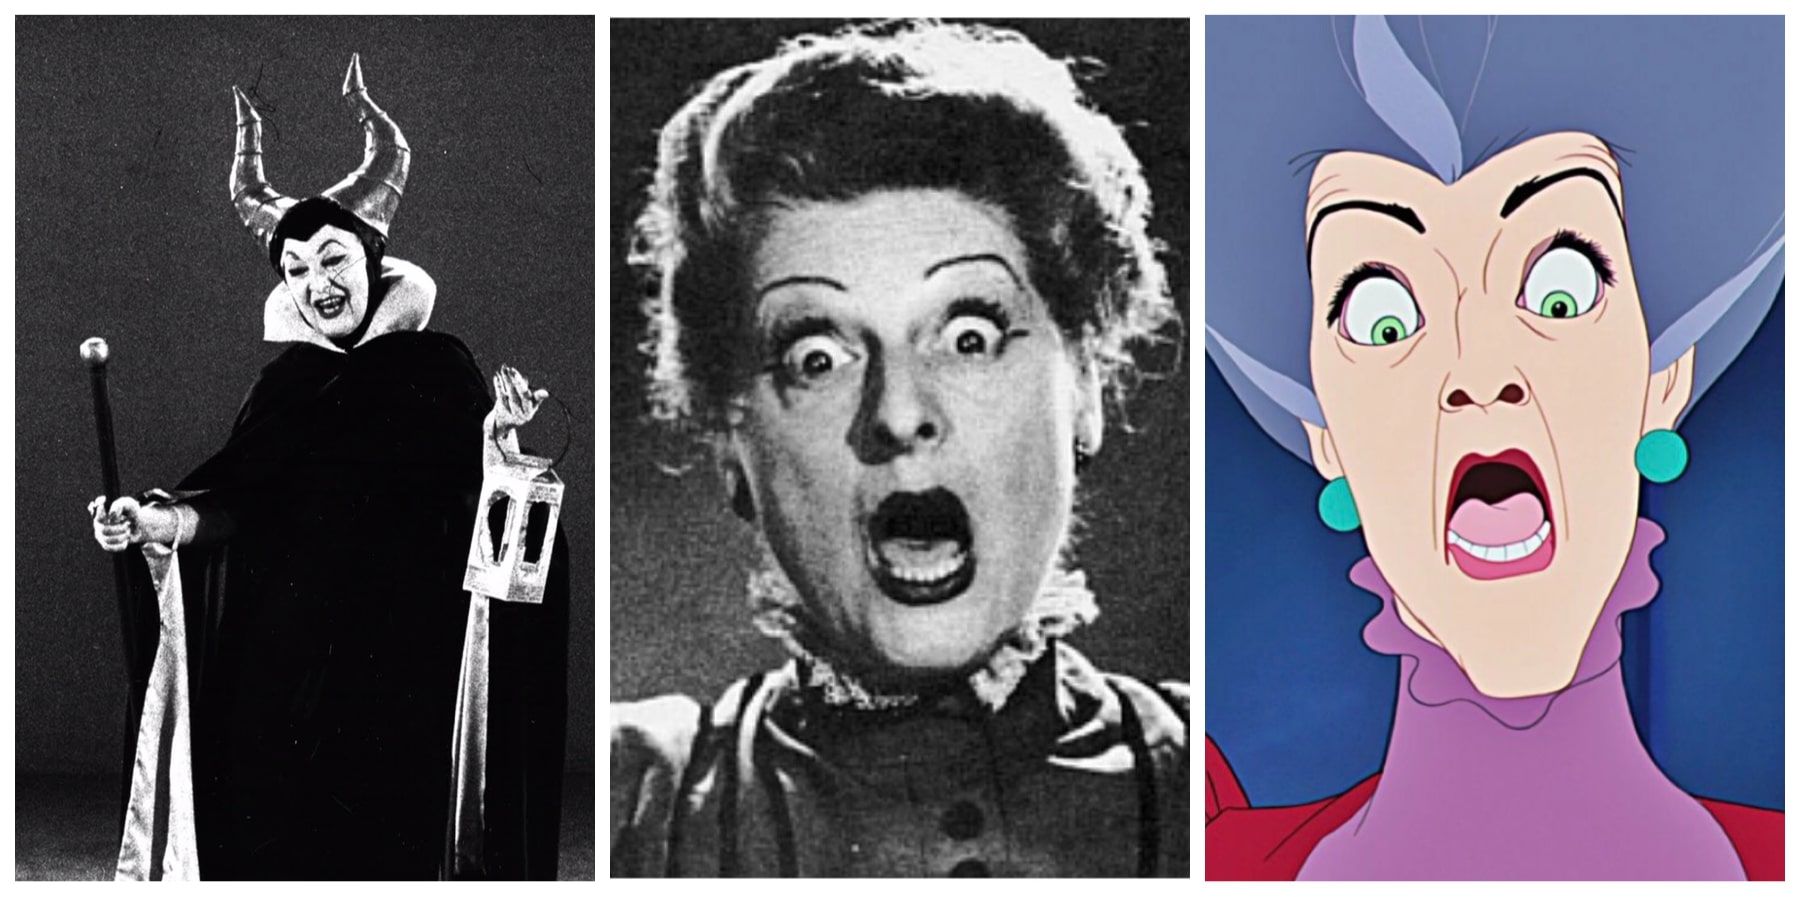 Eleanor Audley as Lady Tremaine in Cinderella and Maleficent in Sleeping Beauty